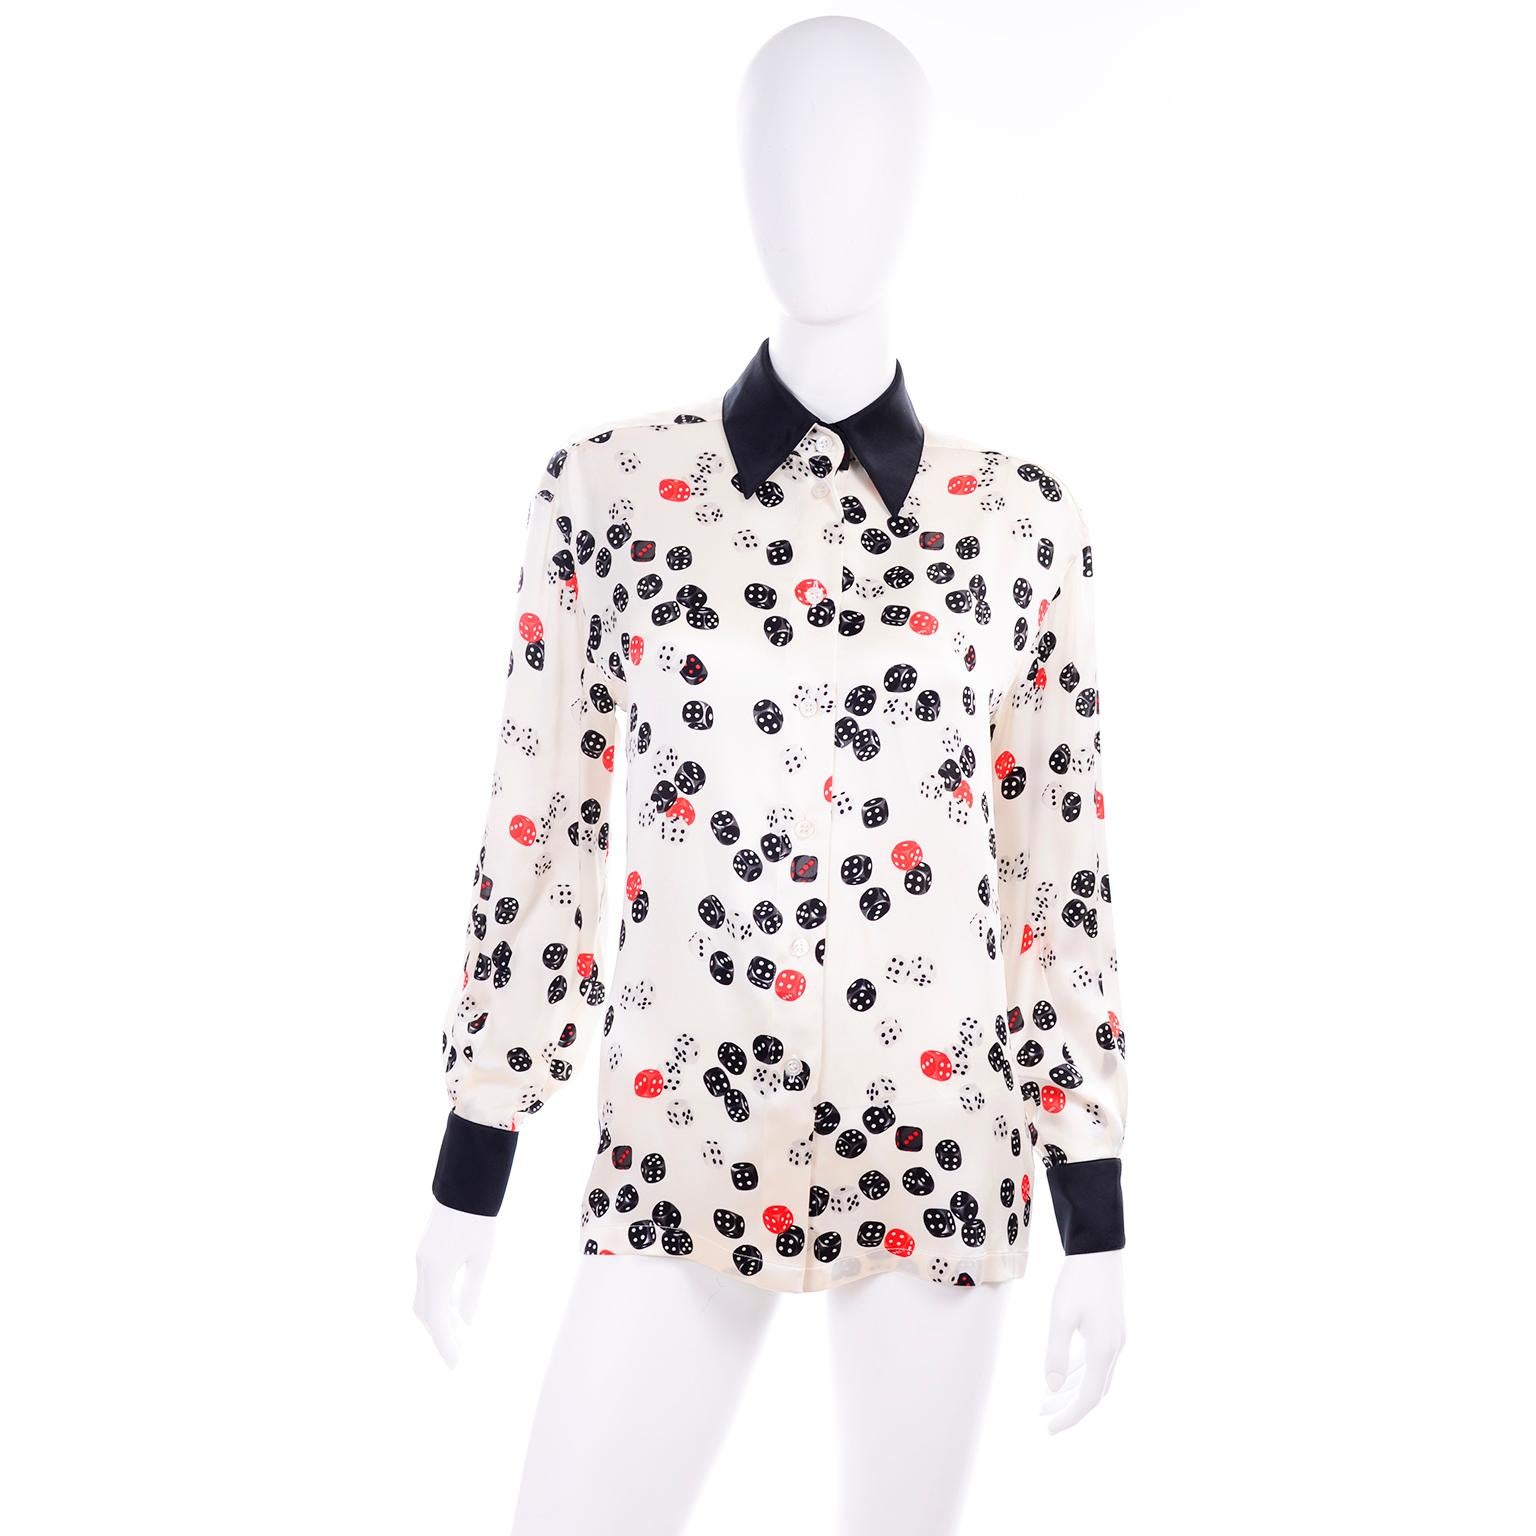 This is another fabulous vintage Escada silk blouse designed by Margaretha Ley. Escada prints are always some of our favorites and this one is no exception. This silk top has black cuffs, a black collar, and the fabric is a red, white and black